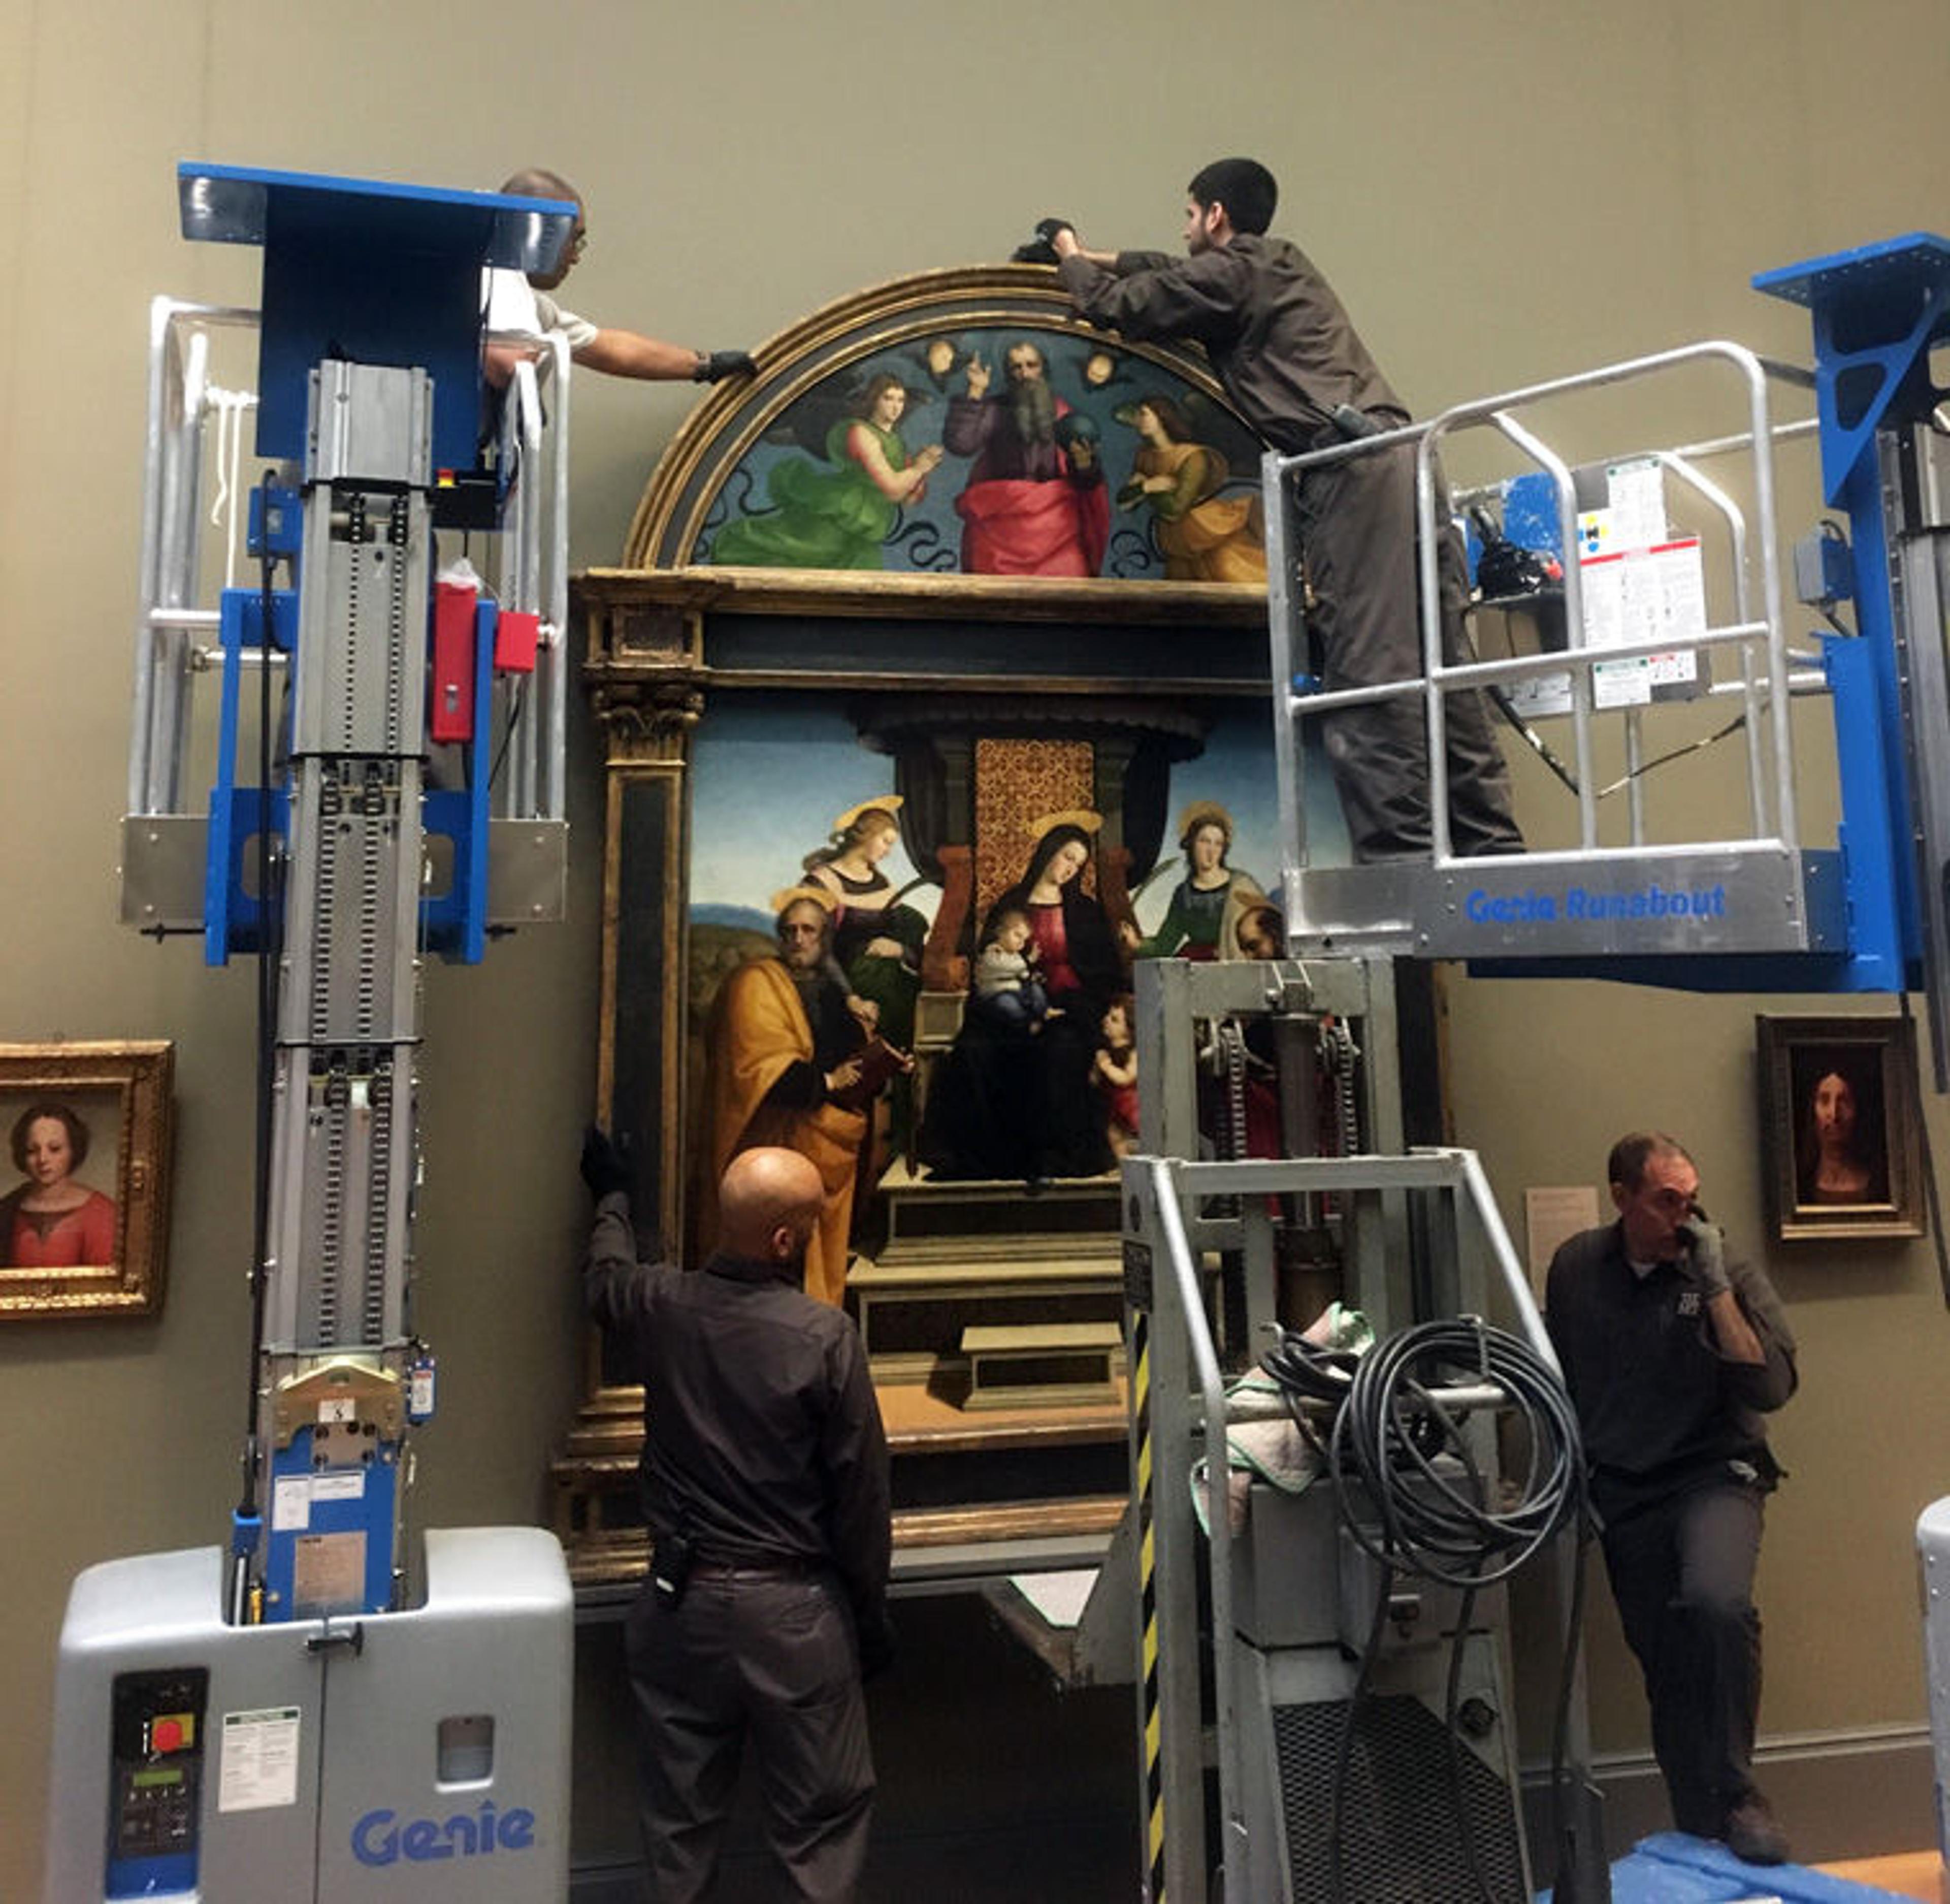 Museum staff prepare to move an altarpiece by Raphael in an art gallery